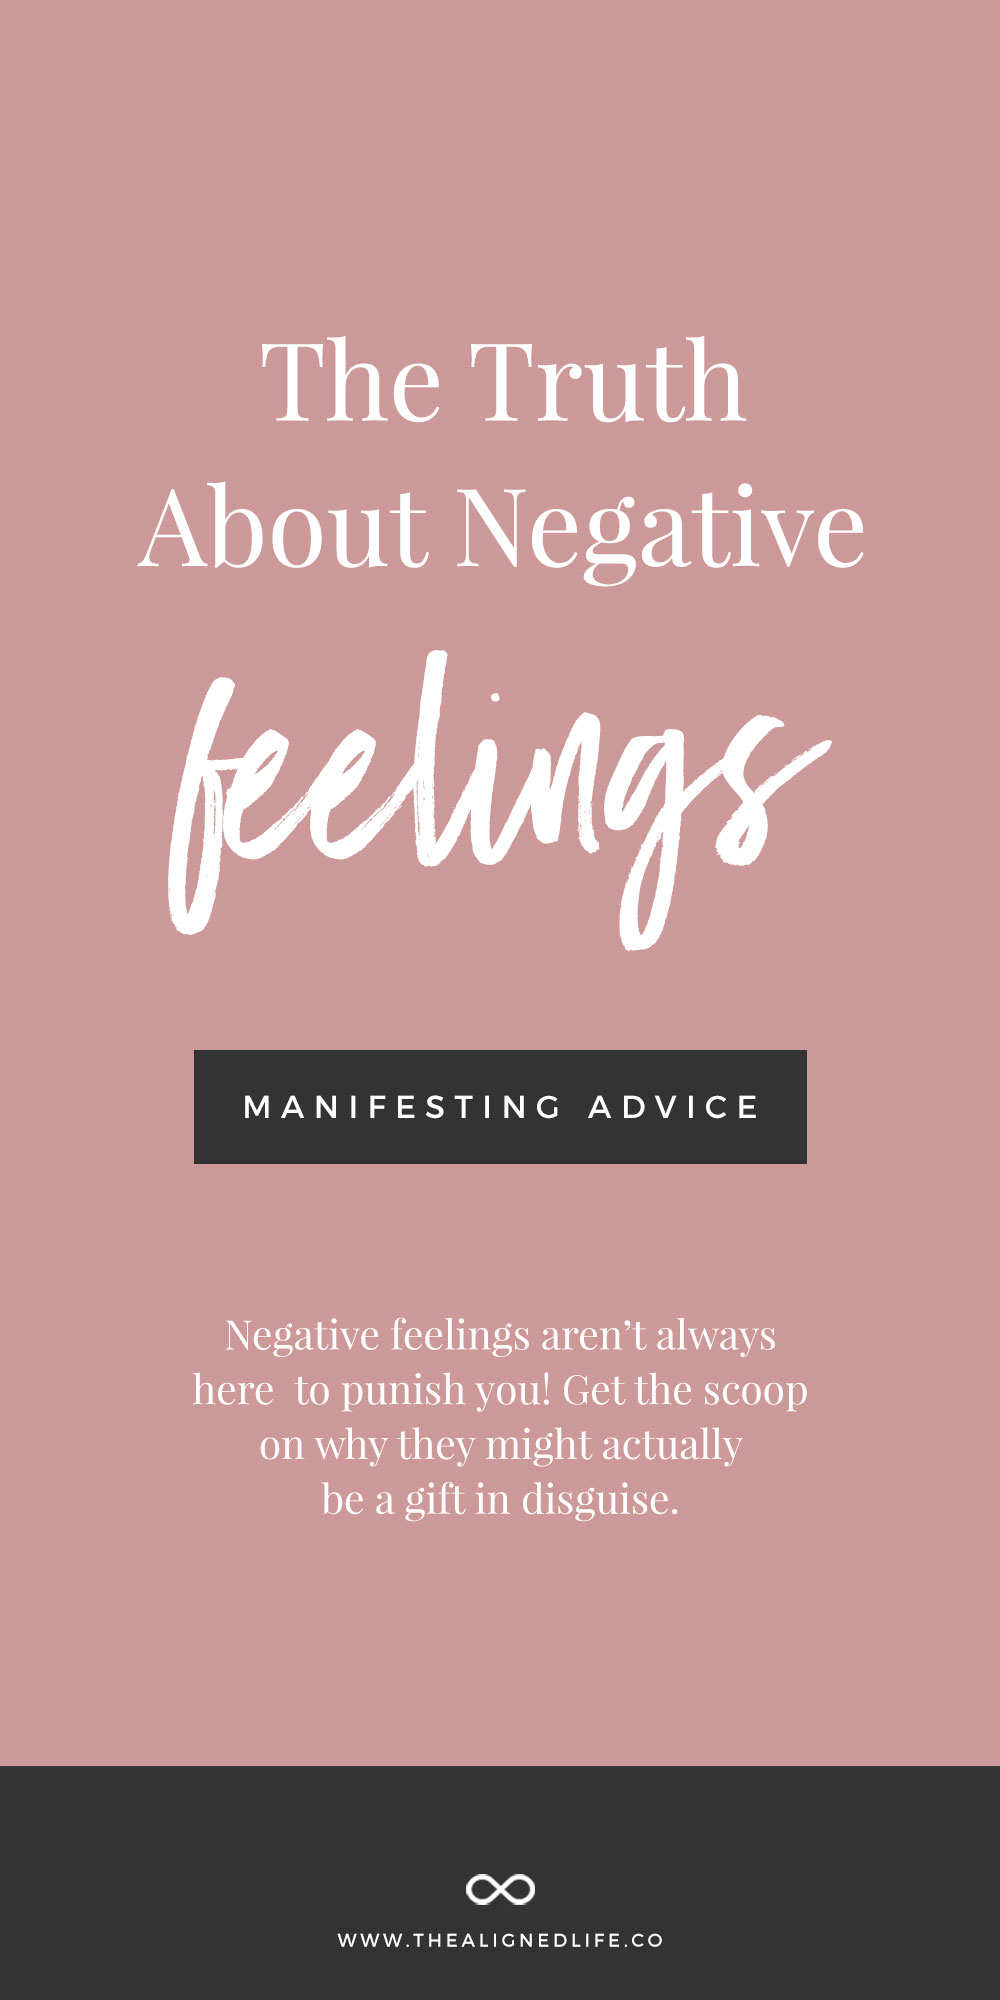 The Truth About Negative Feelings